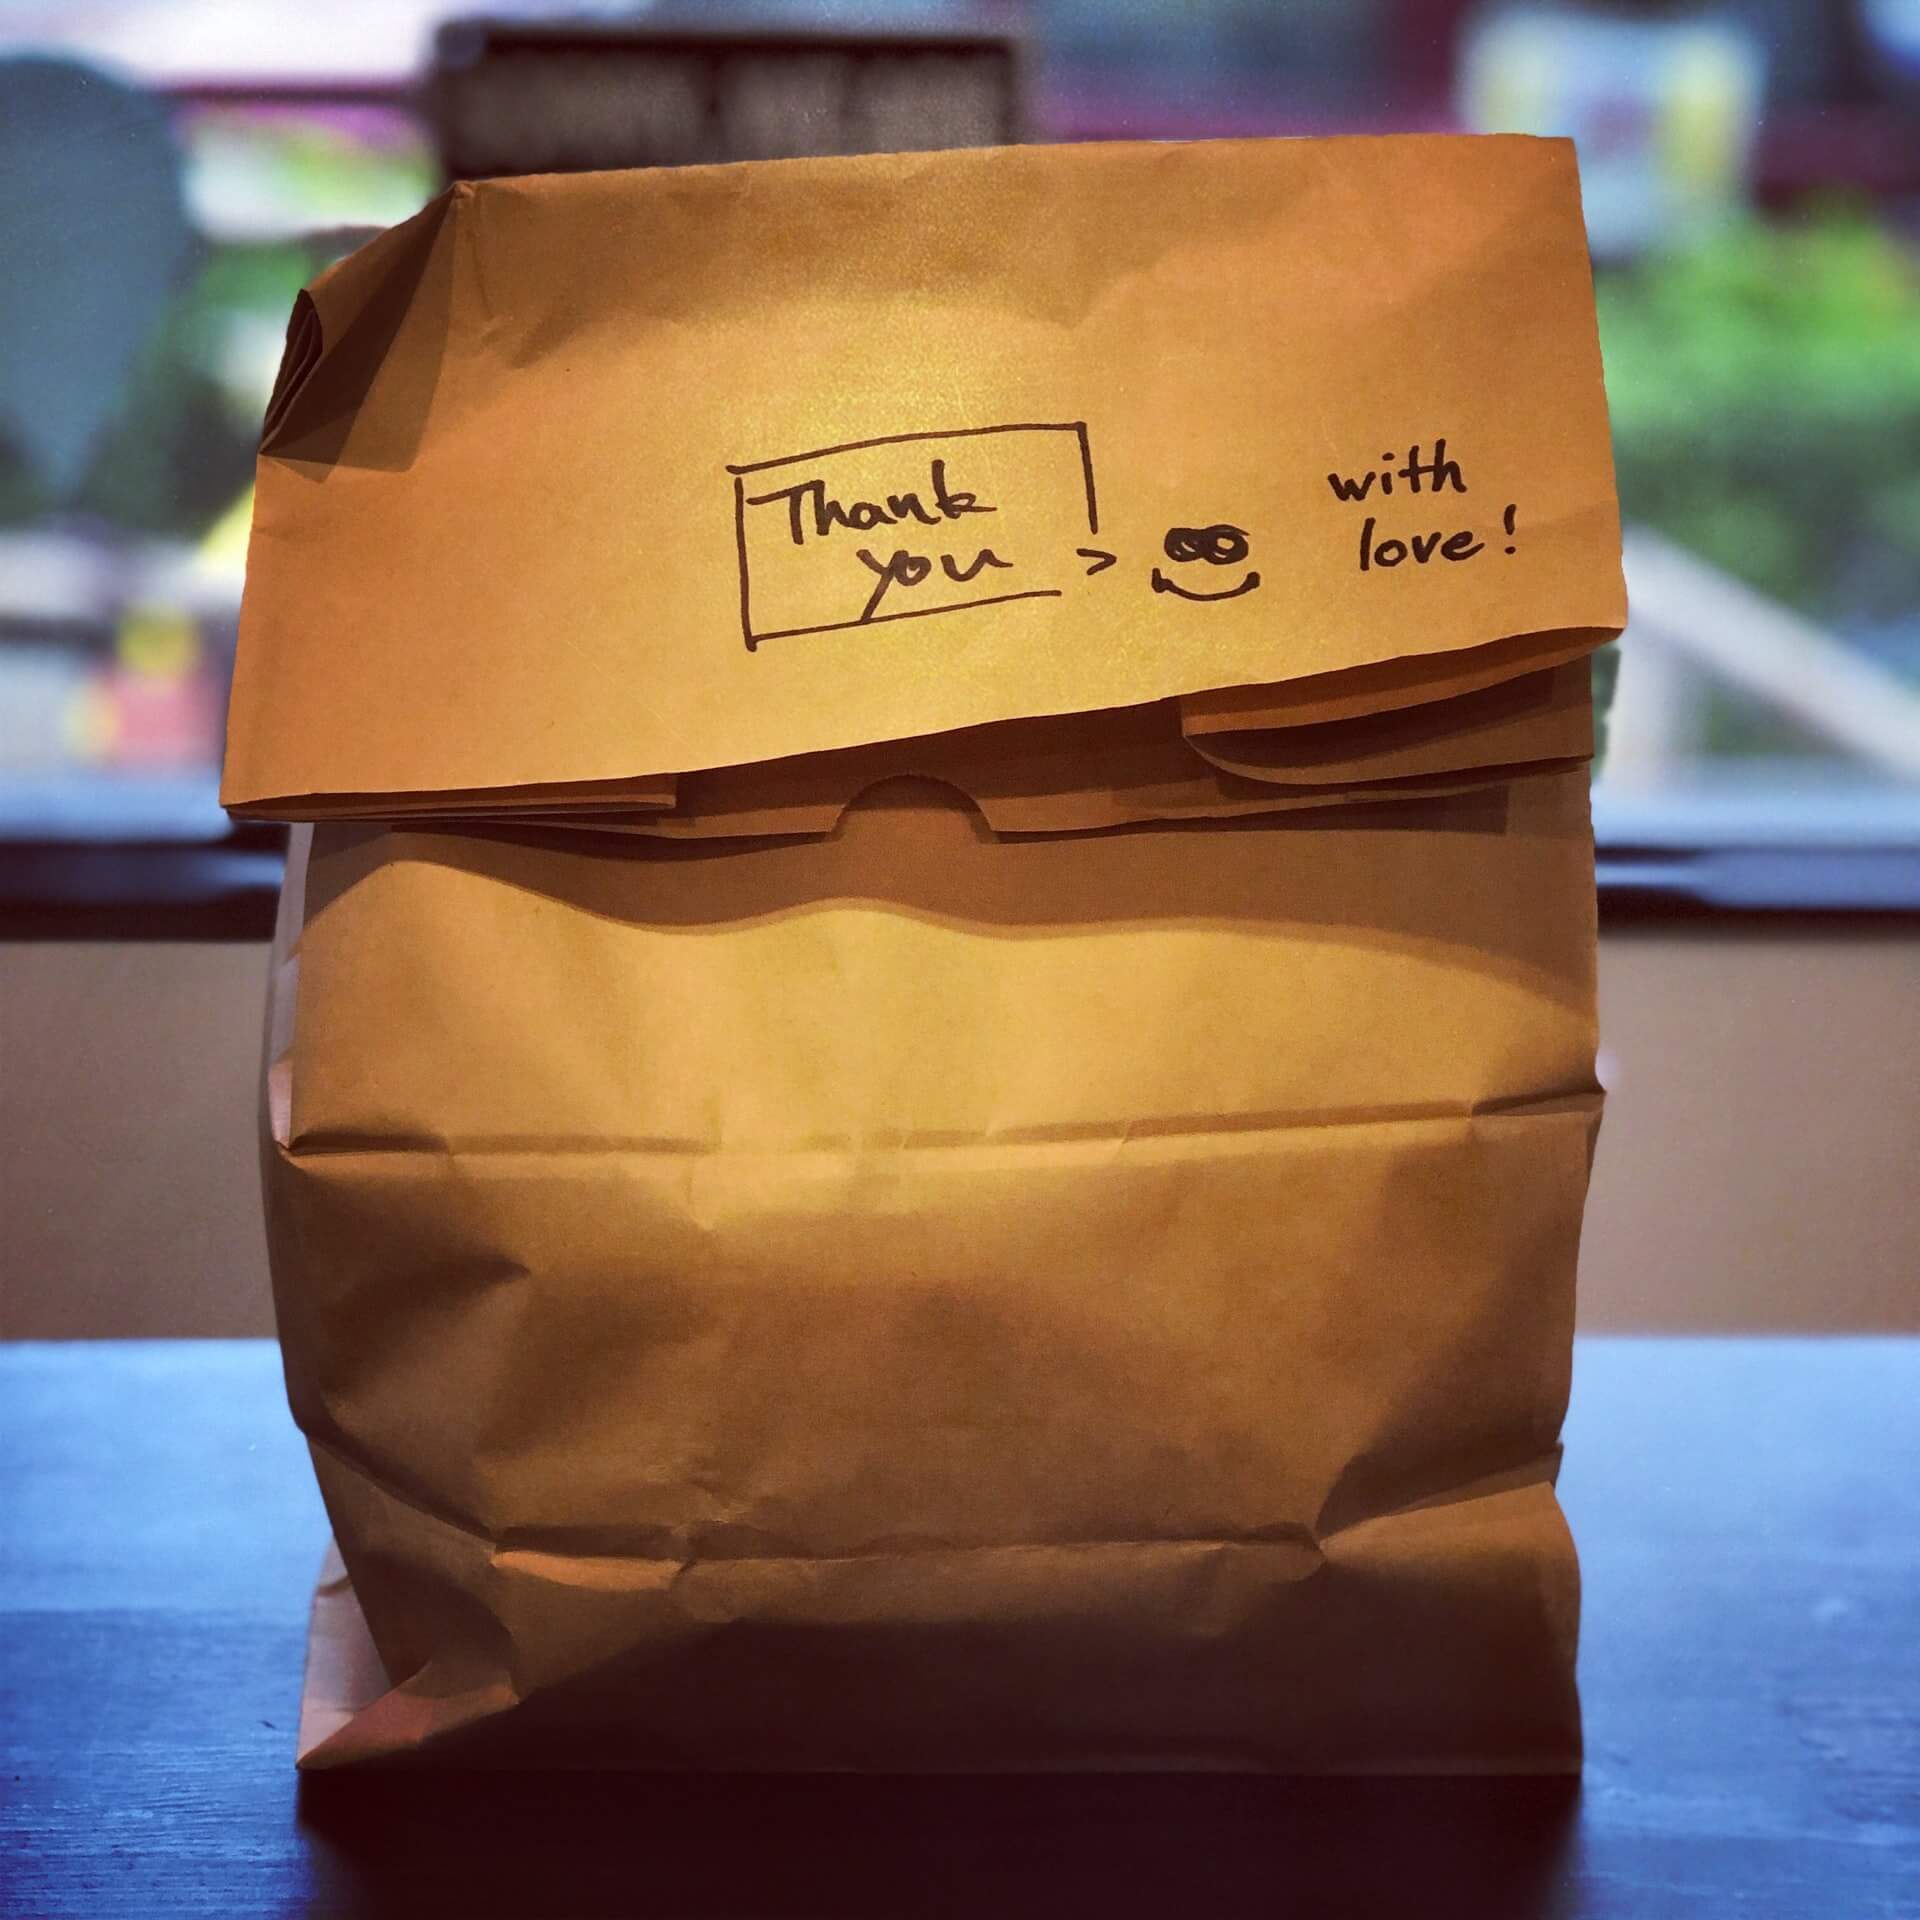 Delivery or takeout food order in brown paper bag